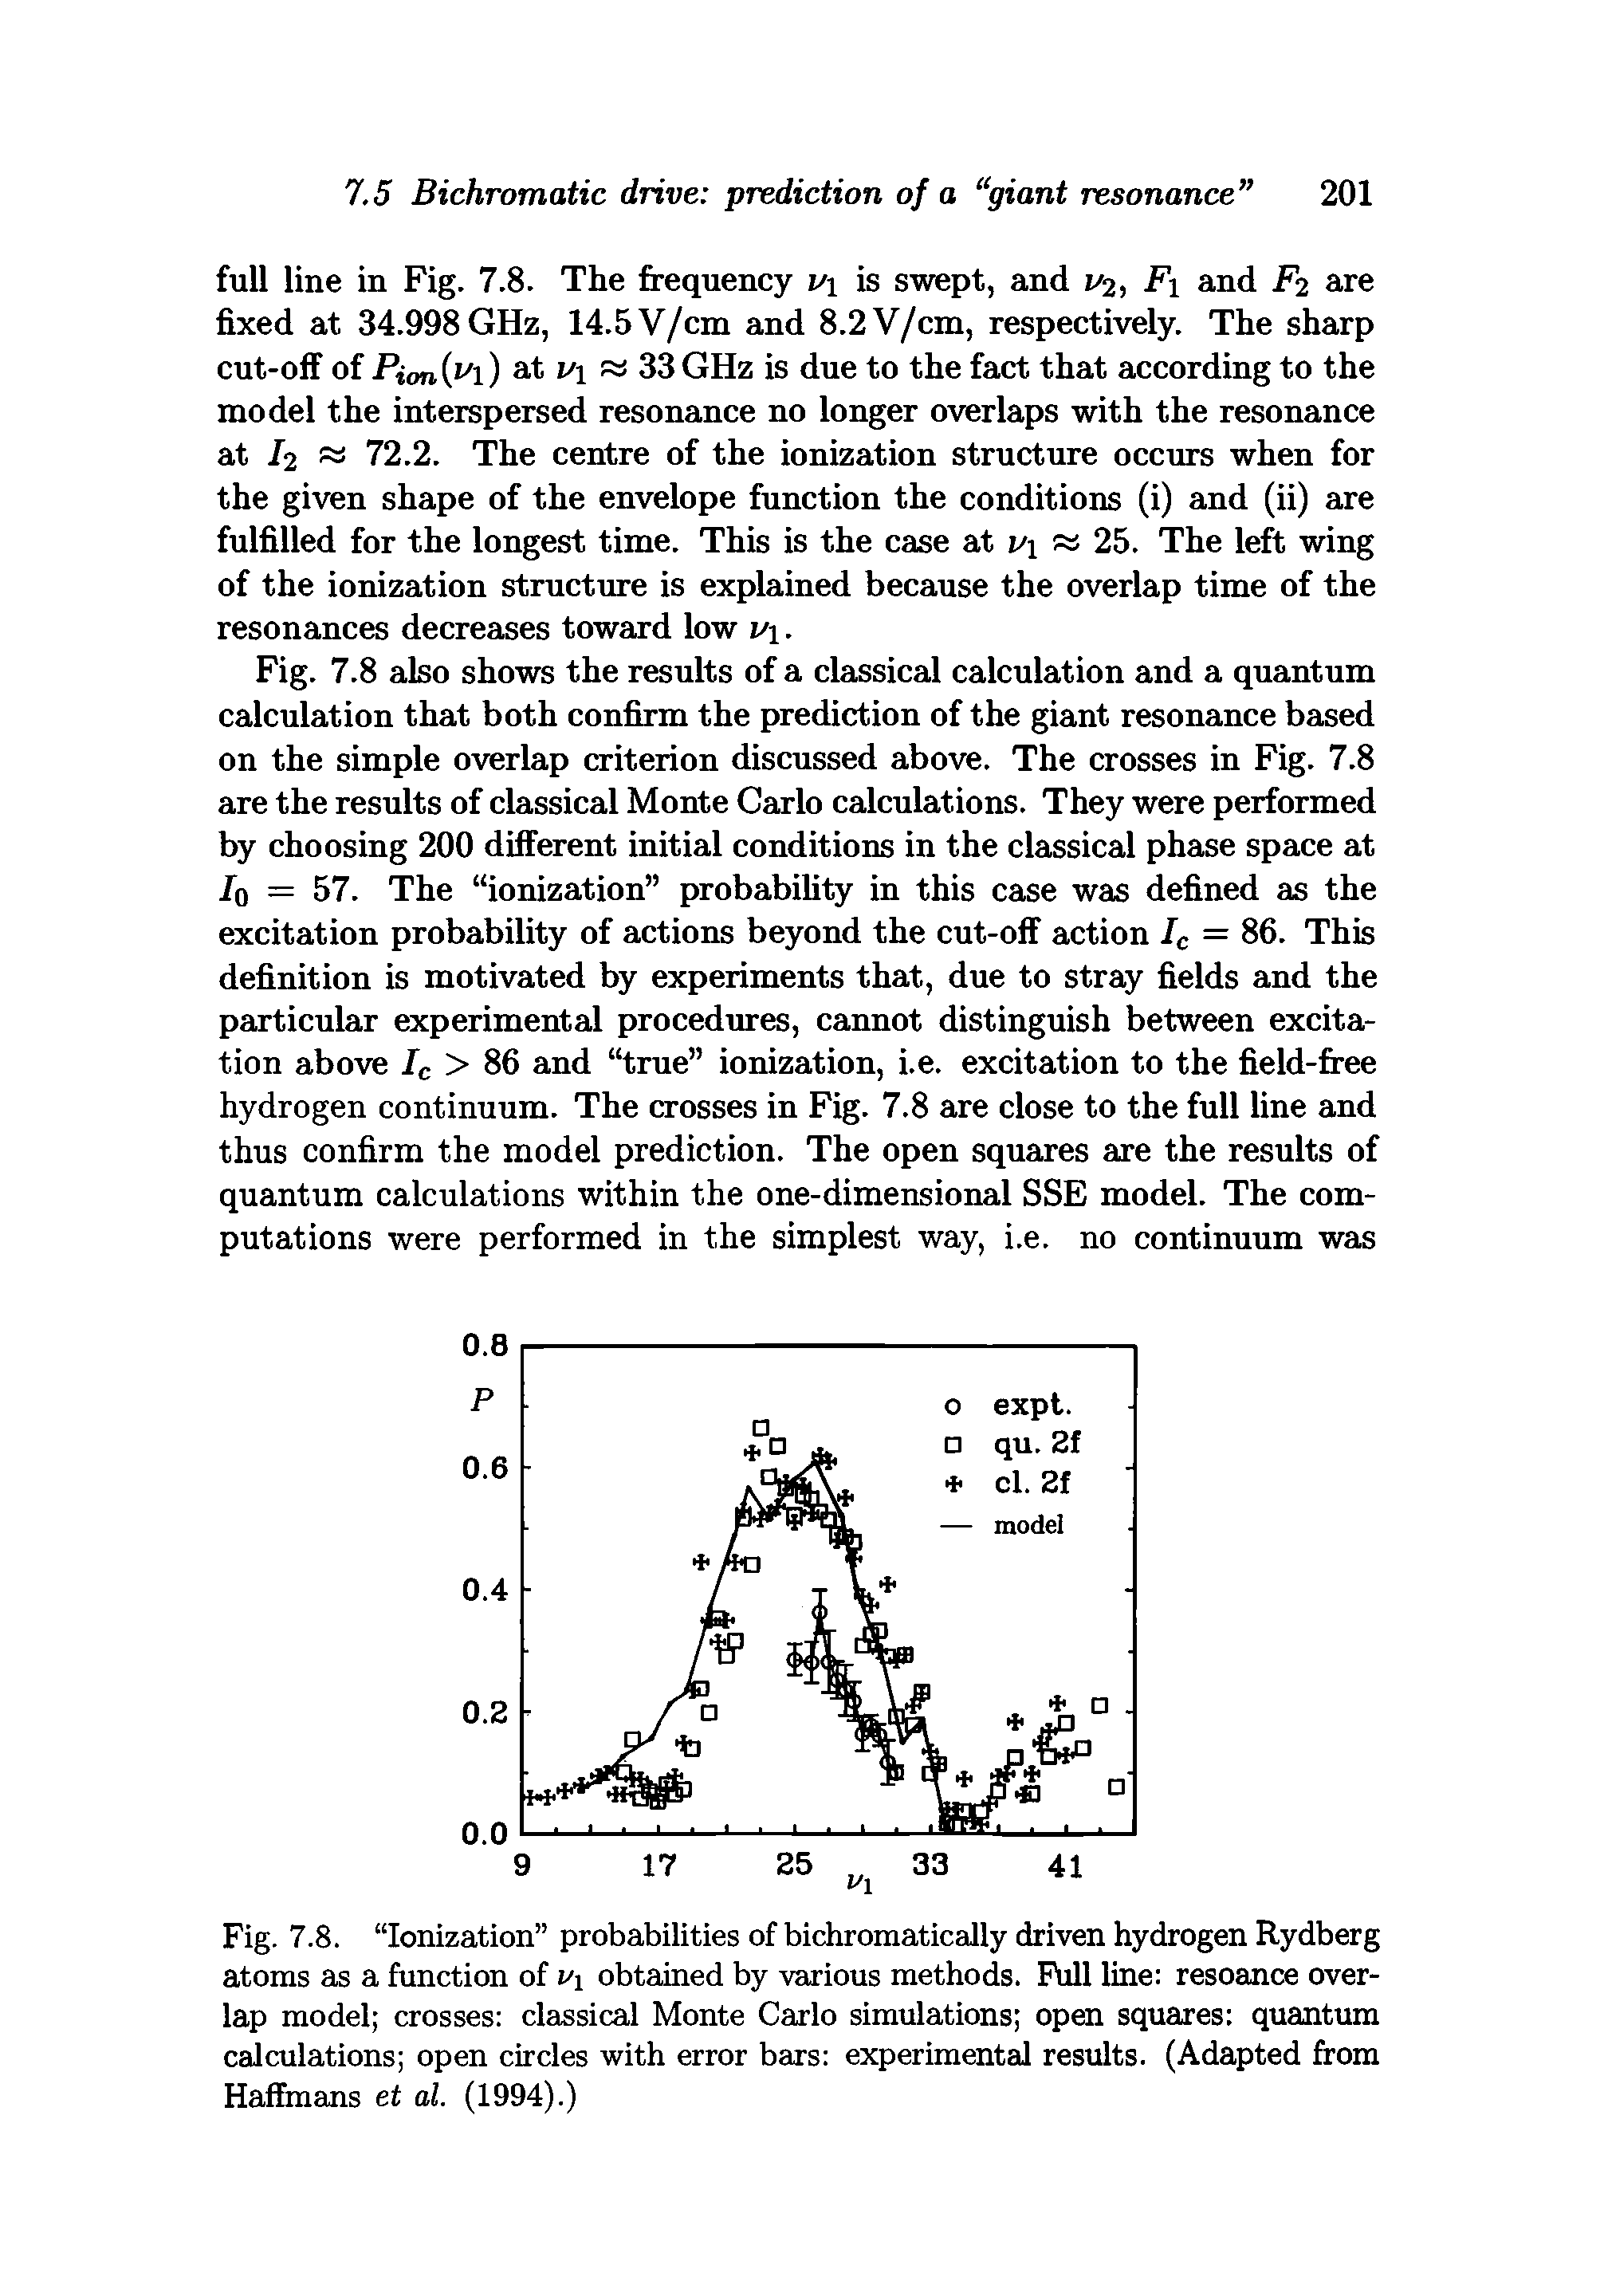 Fig. 7.8. Ionization probabilities of bichromatically driven hydrogen Rydberg atoms as a function of ui obtained by various methods. Ftdl line resoance overlap model crosses classical Monte Carlo simulations open squares quantum calculations open circles with error bars experimental results. (Adapted from Haffmans et al. (1994).)...